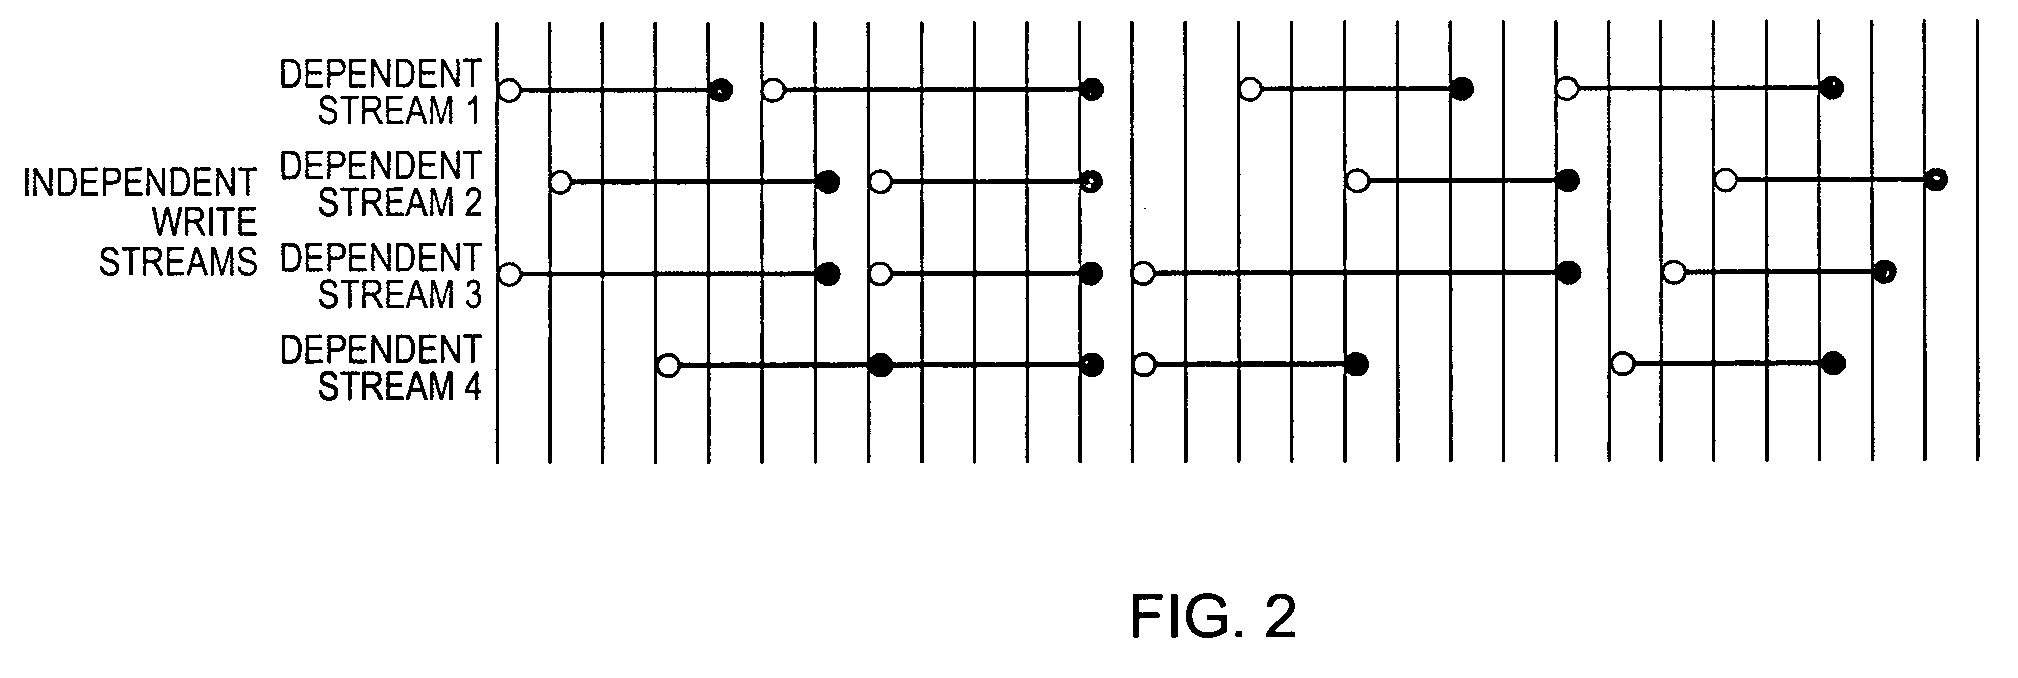 Method for maintaining high performance while preserving relative write I/O ordering for a semi-synchronous remote replication solution